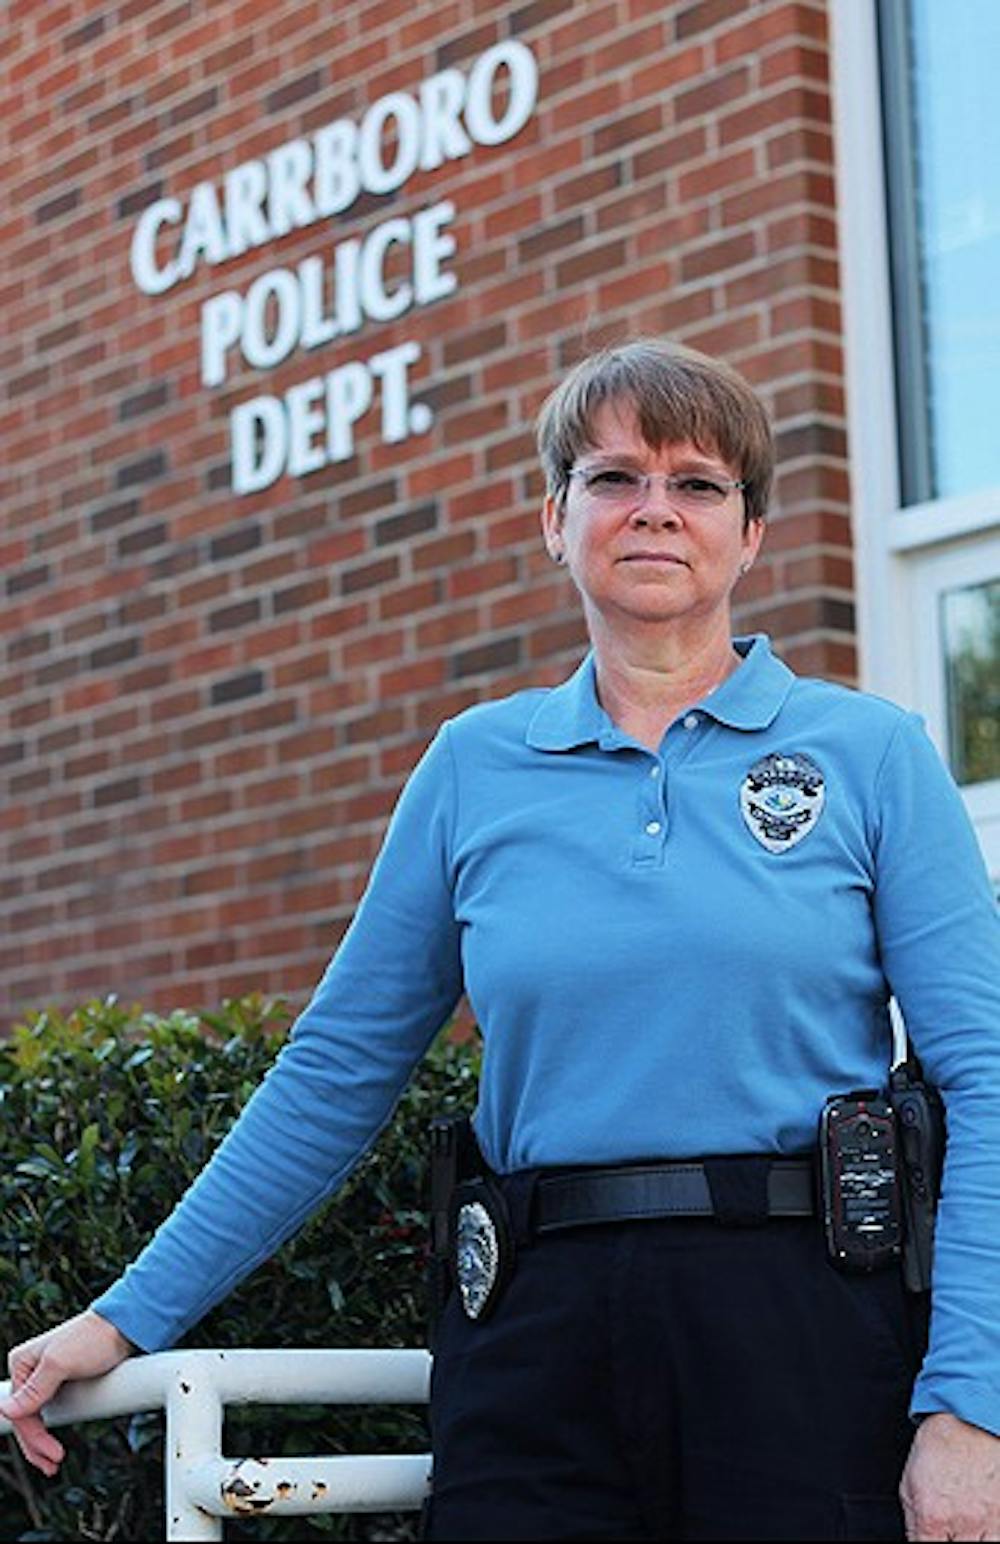 Carrboro Police Chief Carolyn Hutchison has announced her retirement. She will retire on or around October 1, 2013 after 29 hers of outstanding service to Carrboro. She is NC's first openly gay police chief.